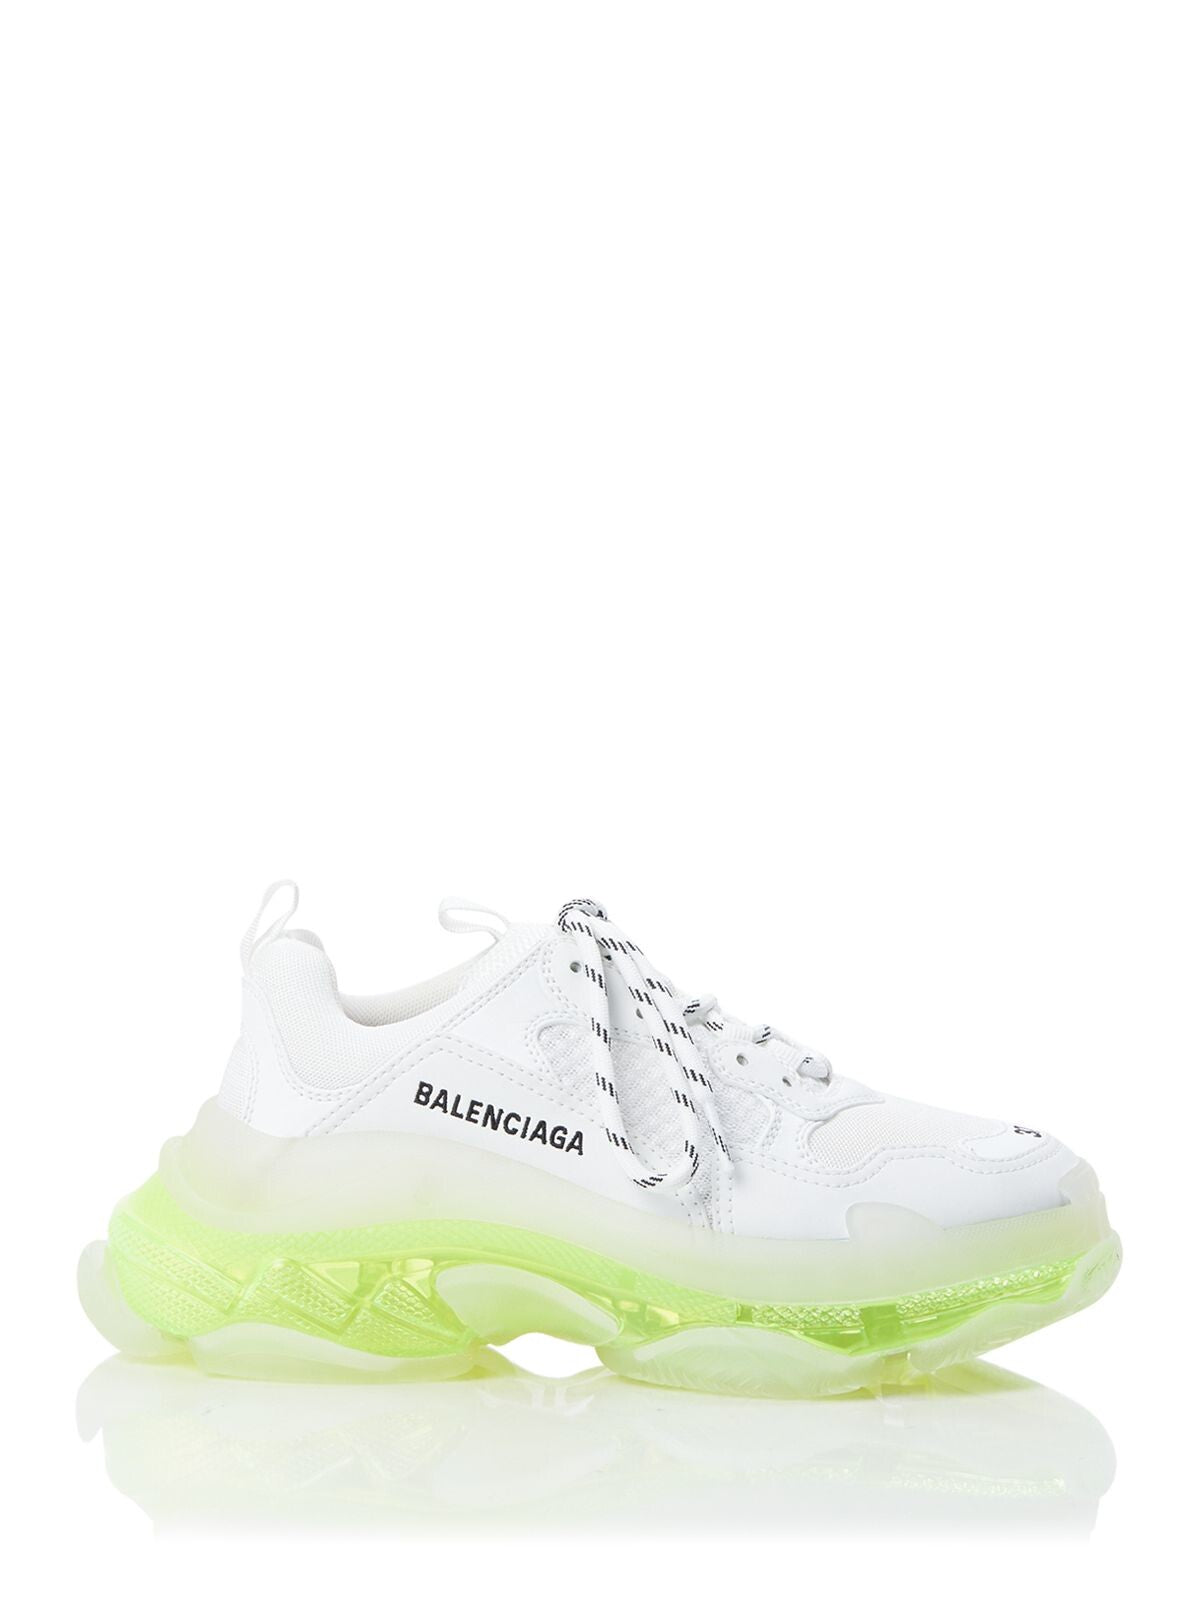 BALENCIAGA Womens White Logo Removable Insole Comfort Triple S Round Toe Lace-Up Athletic Sneakers Shoes 10